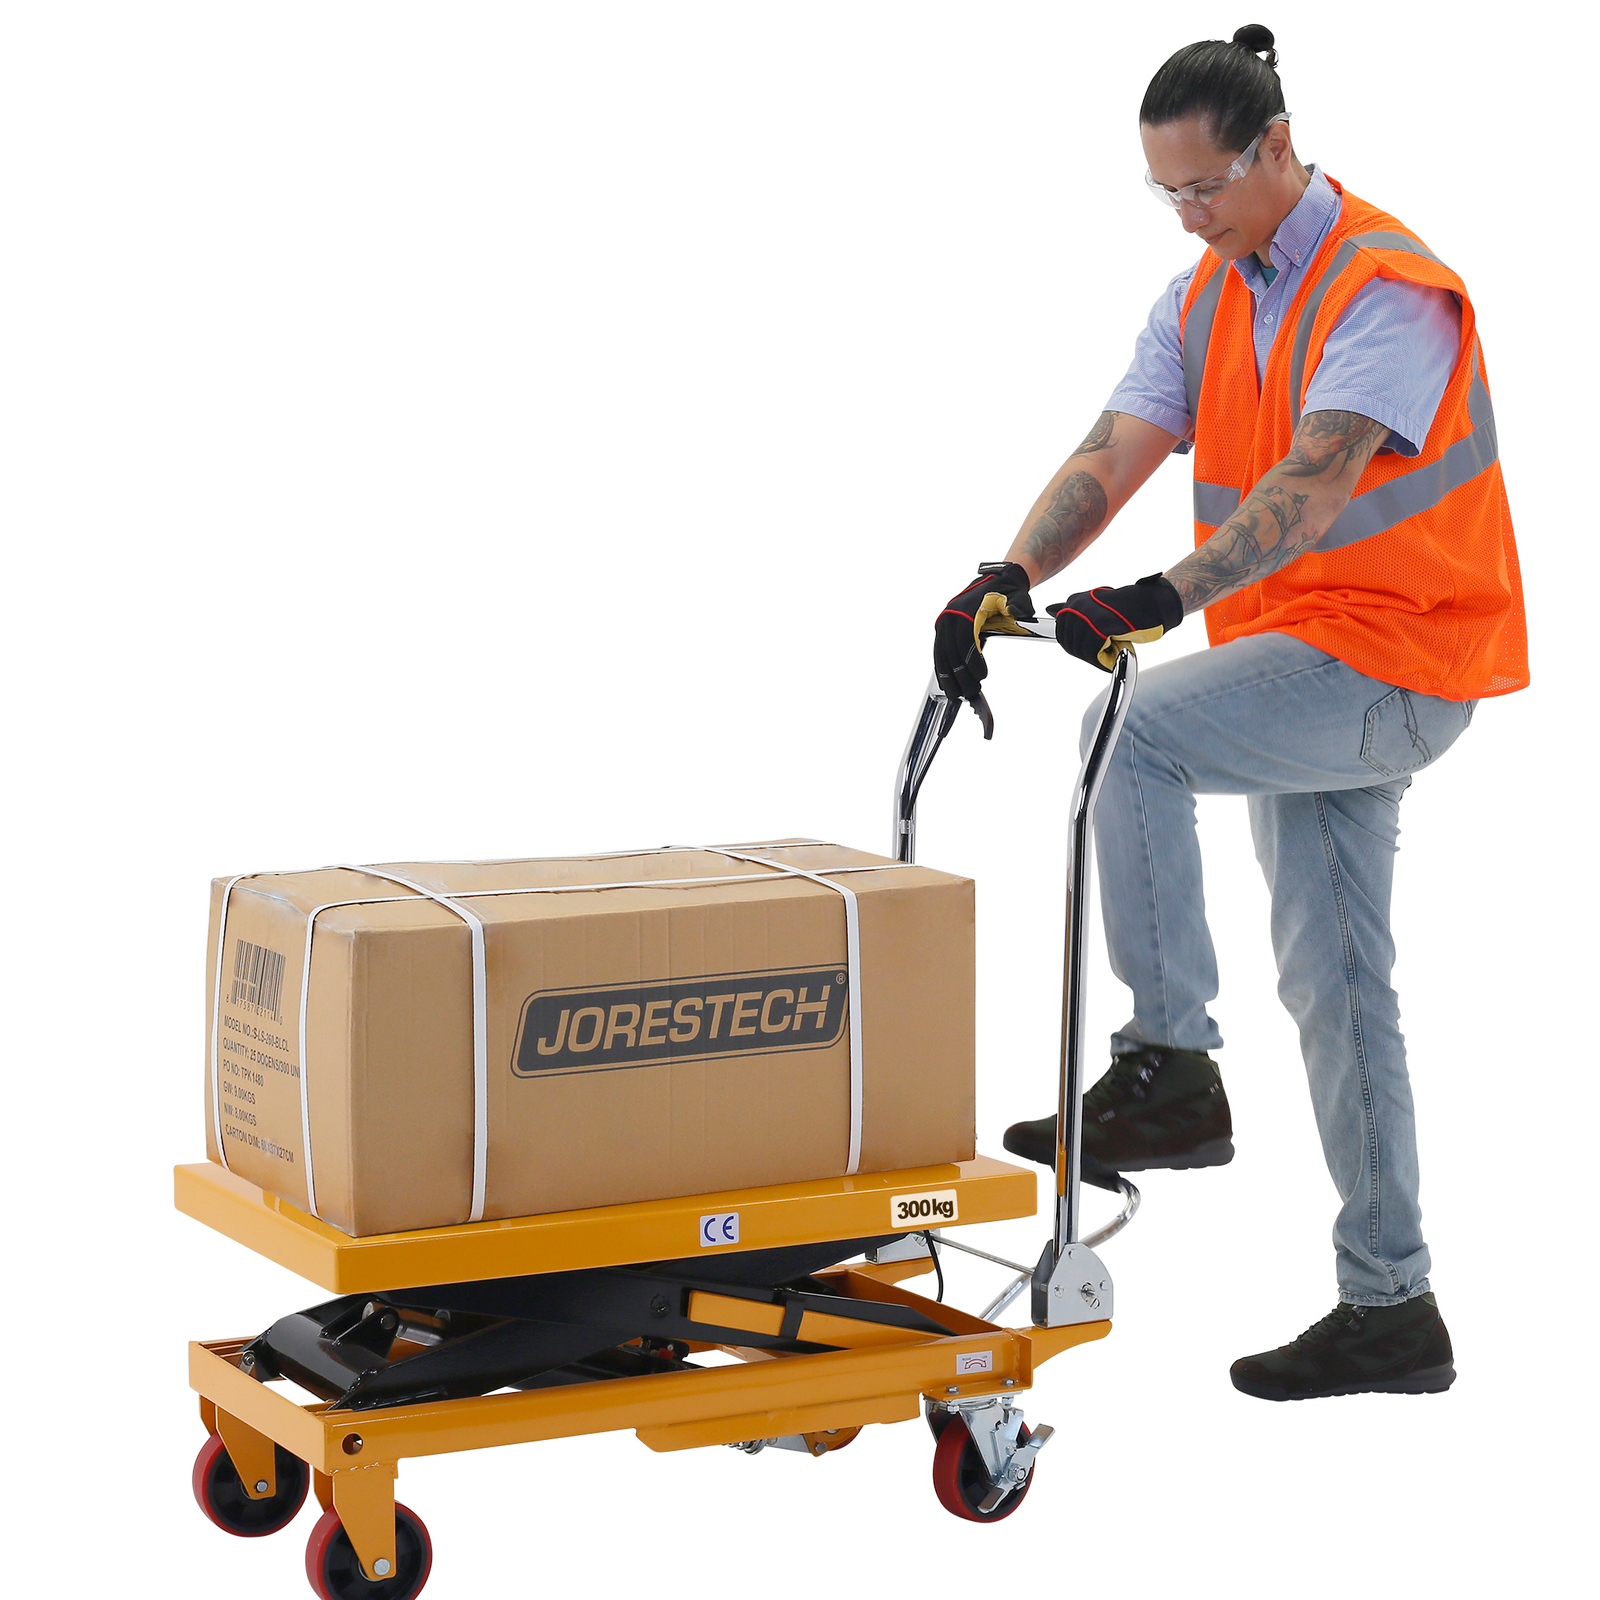 A man wearing an orange high visibility vest is pressing the foot pedal of the Jorestech Scissor lift table to lift a heavy box with ease